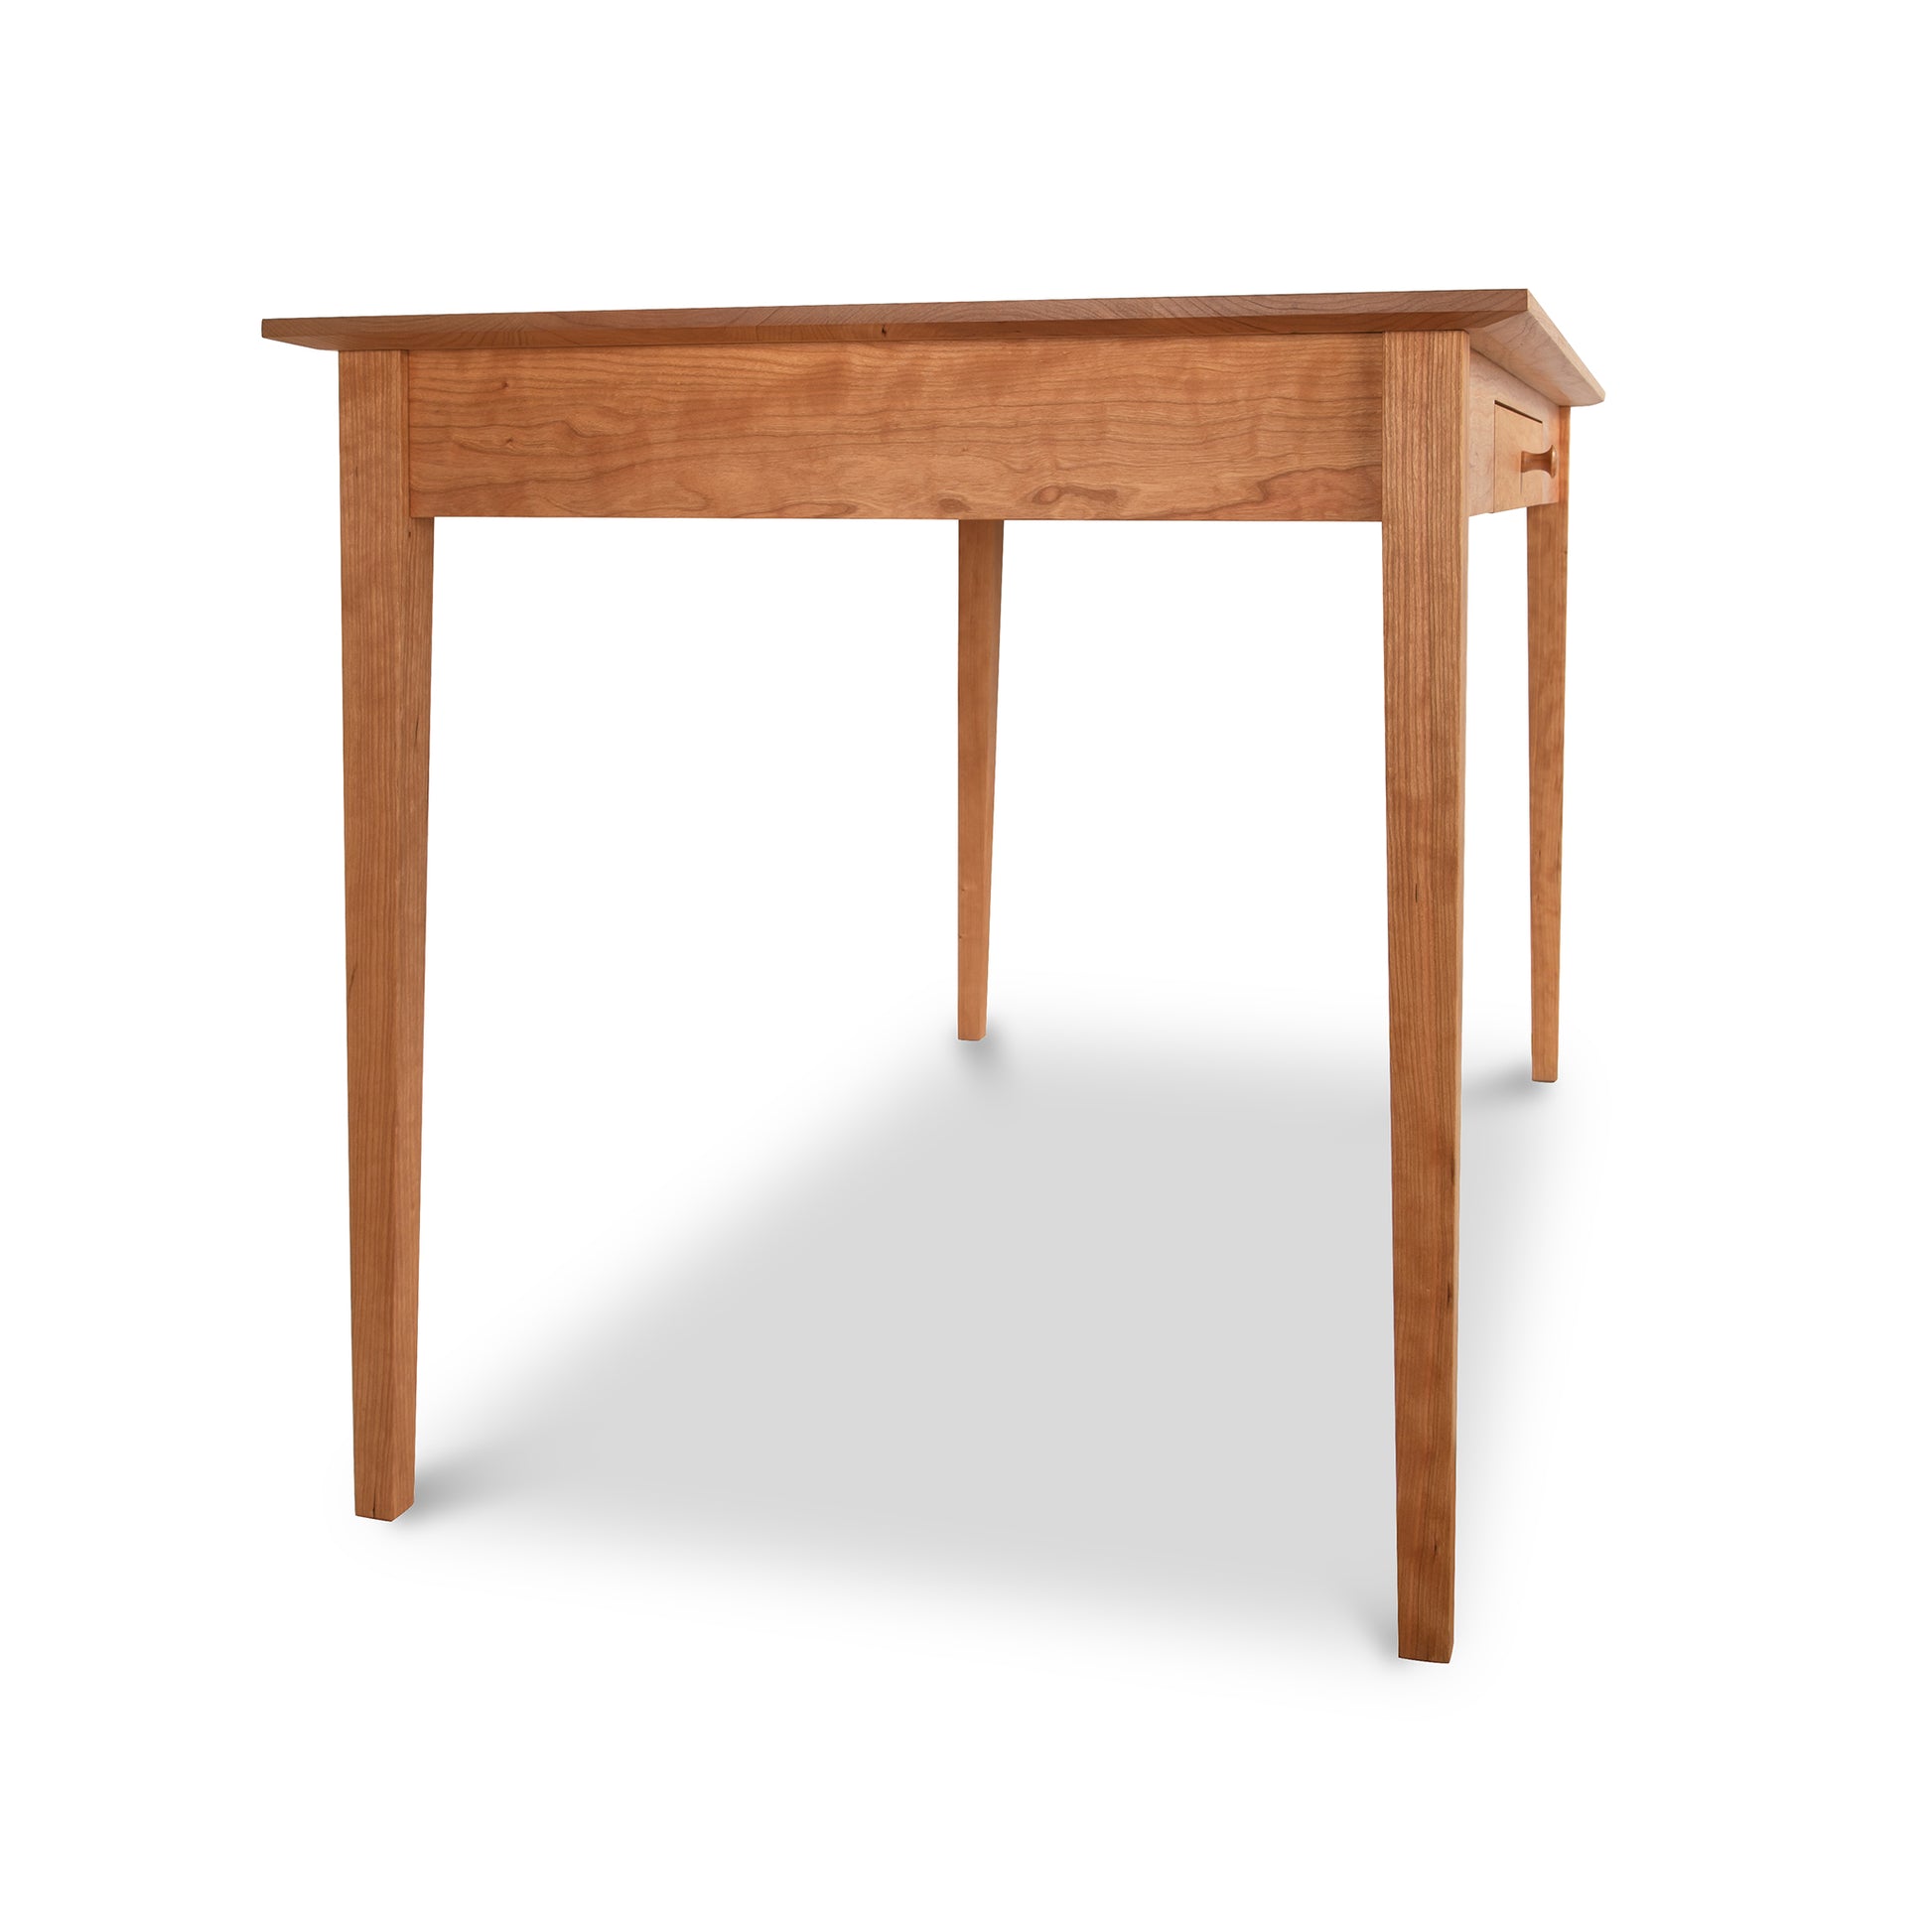 A sustainably harvested American Shaker Writing Desk with a simple design, featuring four straight legs and a thin tabletop, isolated on a white background with a soft shadow underneath by Maple Corner Woodworks.